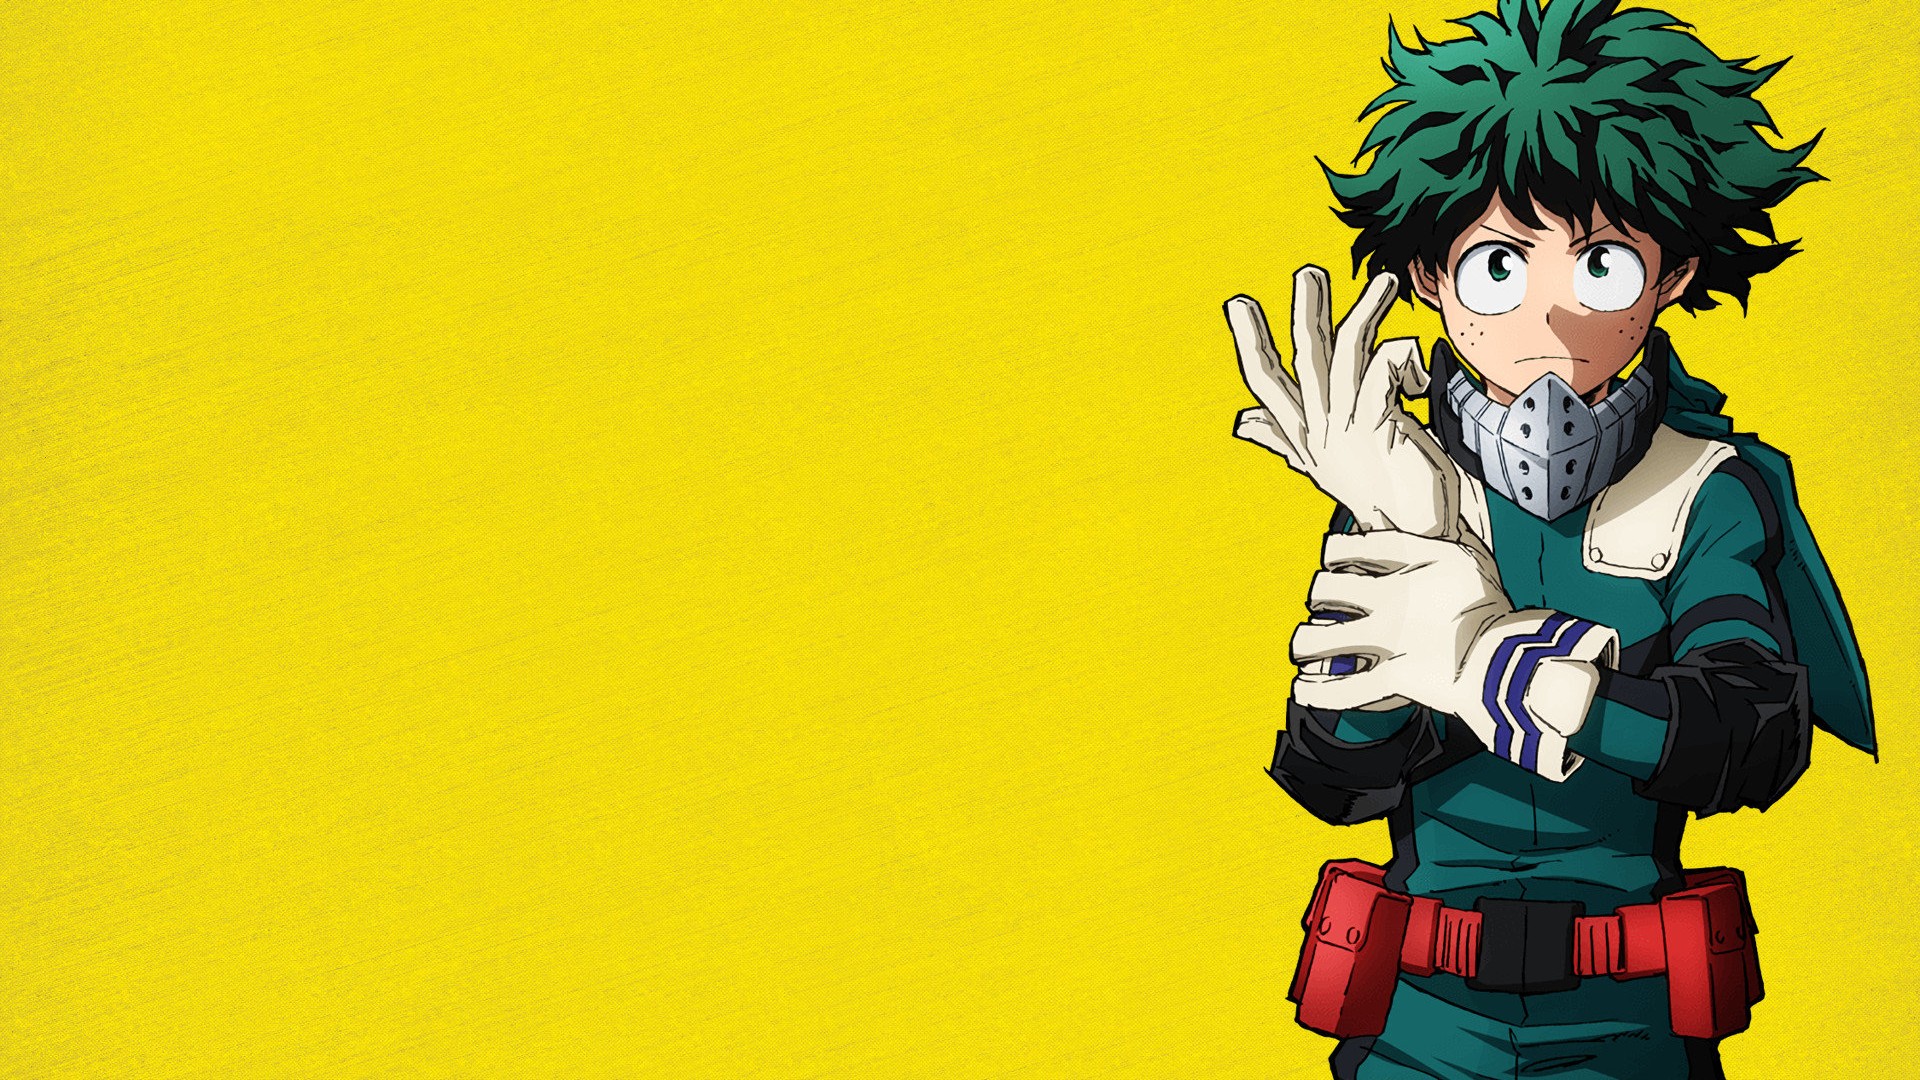 My Hero Academia Desktop Wallpaper With high-resolution 1920X1080 pixel. You can use this wallpaper for your Windows and Mac OS computers as well as your Android and iPhone smartphones